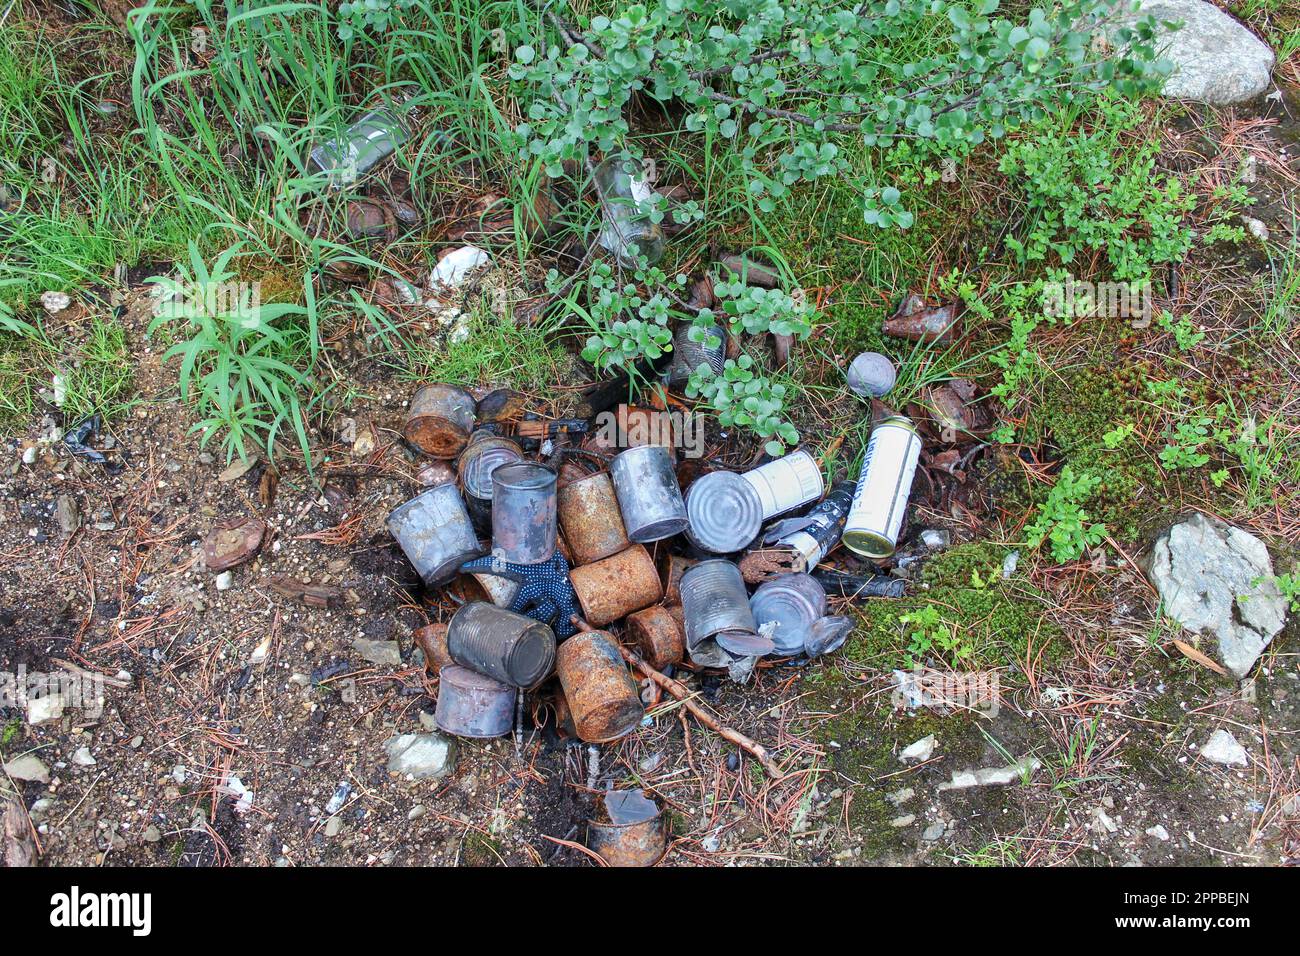 Garbage thrown in forest, empty bottles and burnt cans scattered around. Negative impact of human behavior on natural environment Stock Photo